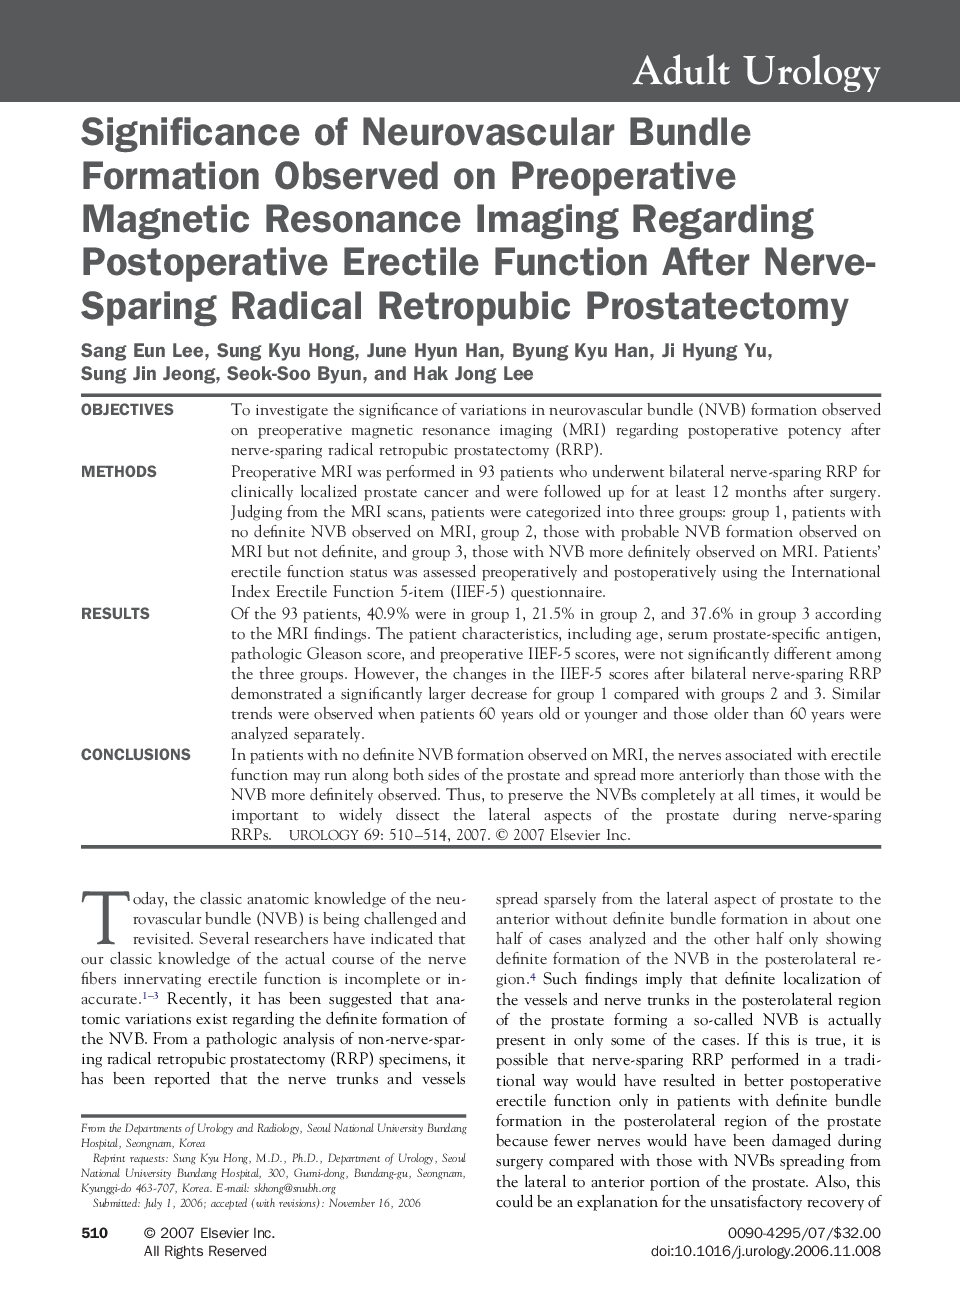 Significance of Neurovascular Bundle Formation Observed on Preoperative Magnetic Resonance Imaging Regarding Postoperative Erectile Function After Nerve-Sparing Radical Retropubic Prostatectomy